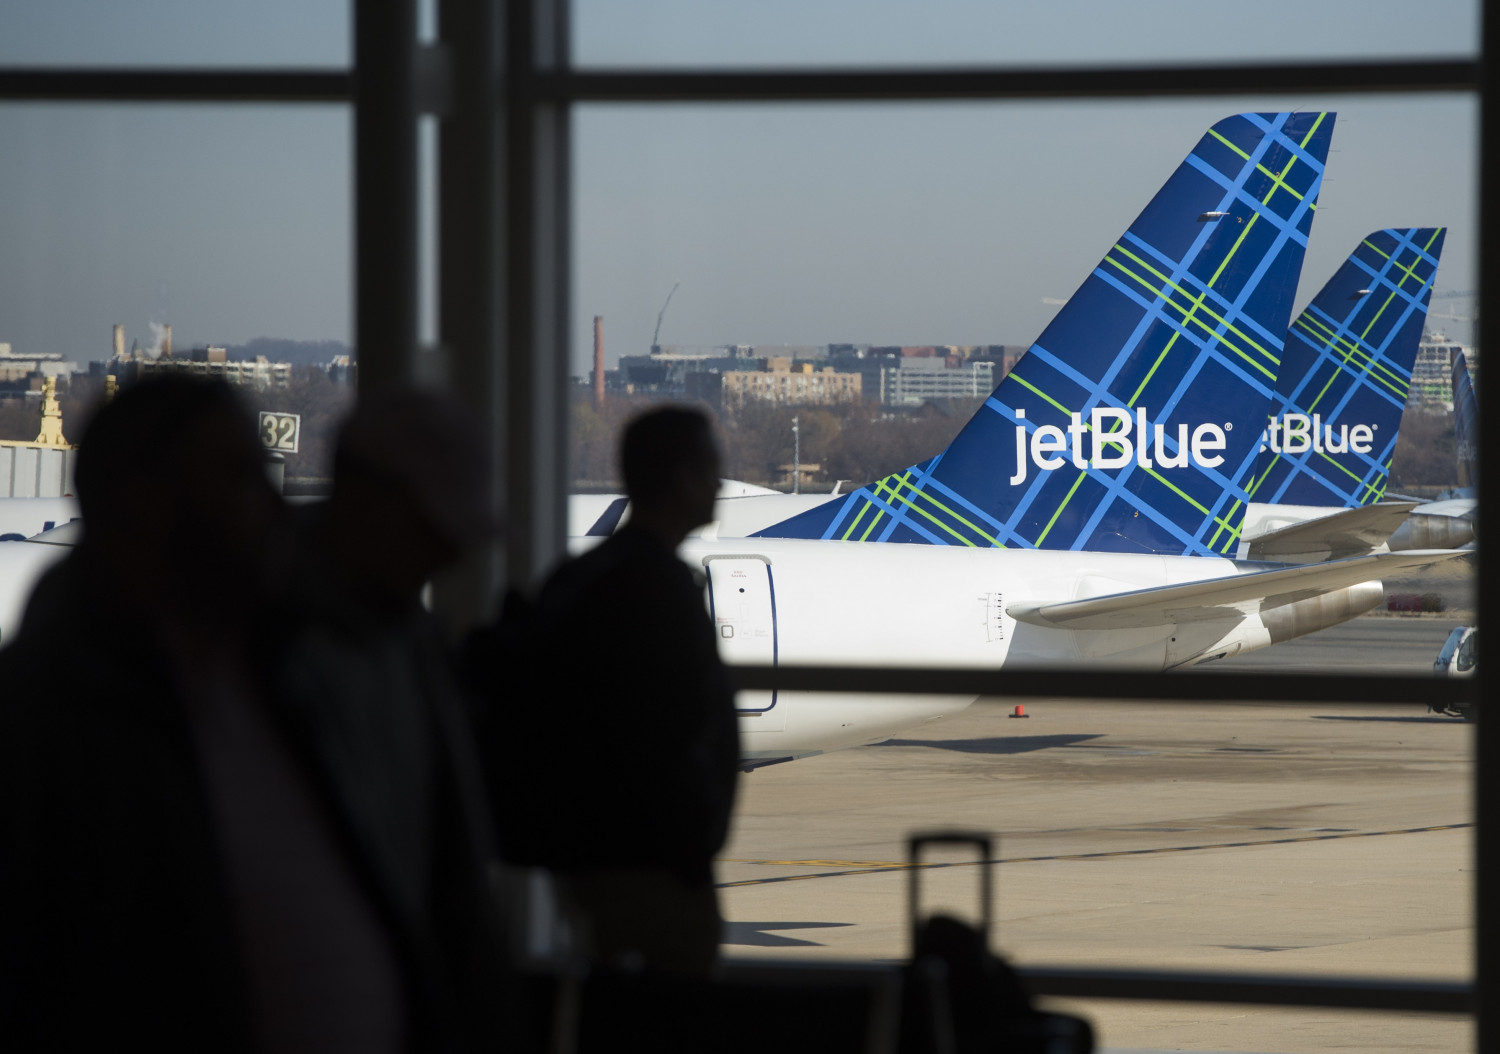 JetBlue Strikes Deal to Buy Spirit Airlines to Create 5th Biggest Low-Cost Carrier